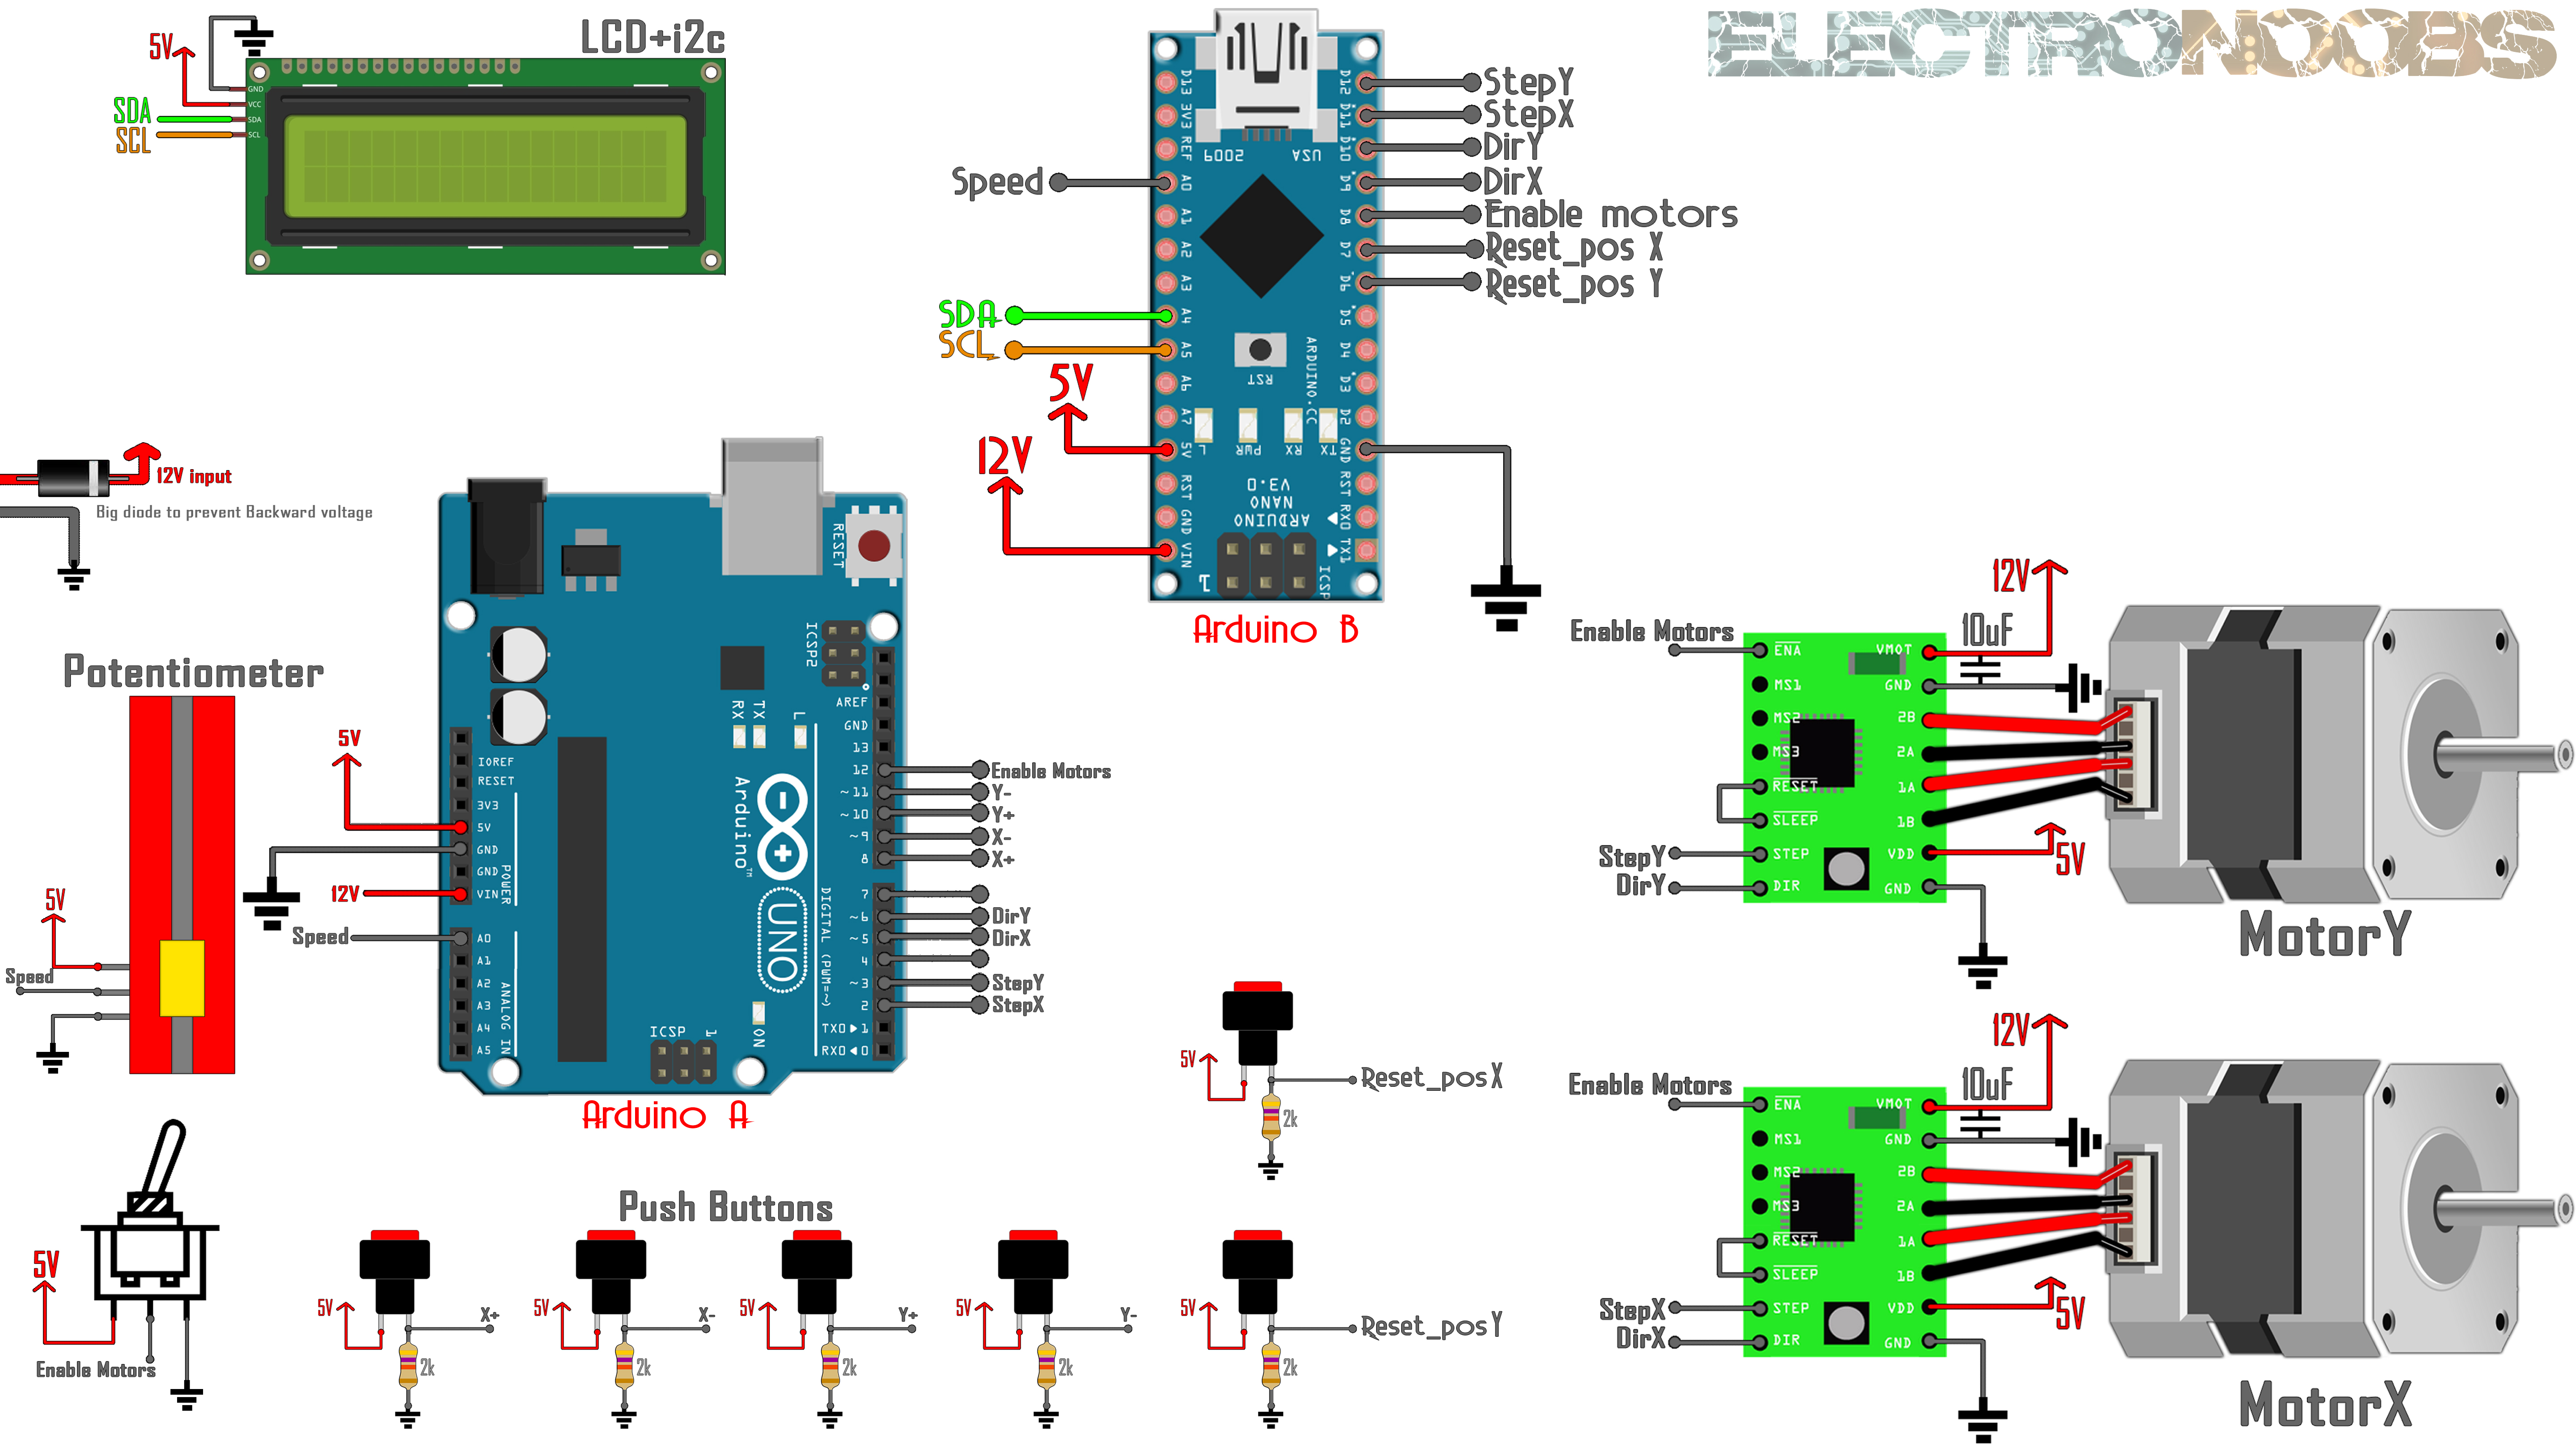 manual CNC arduino schematic with LCD